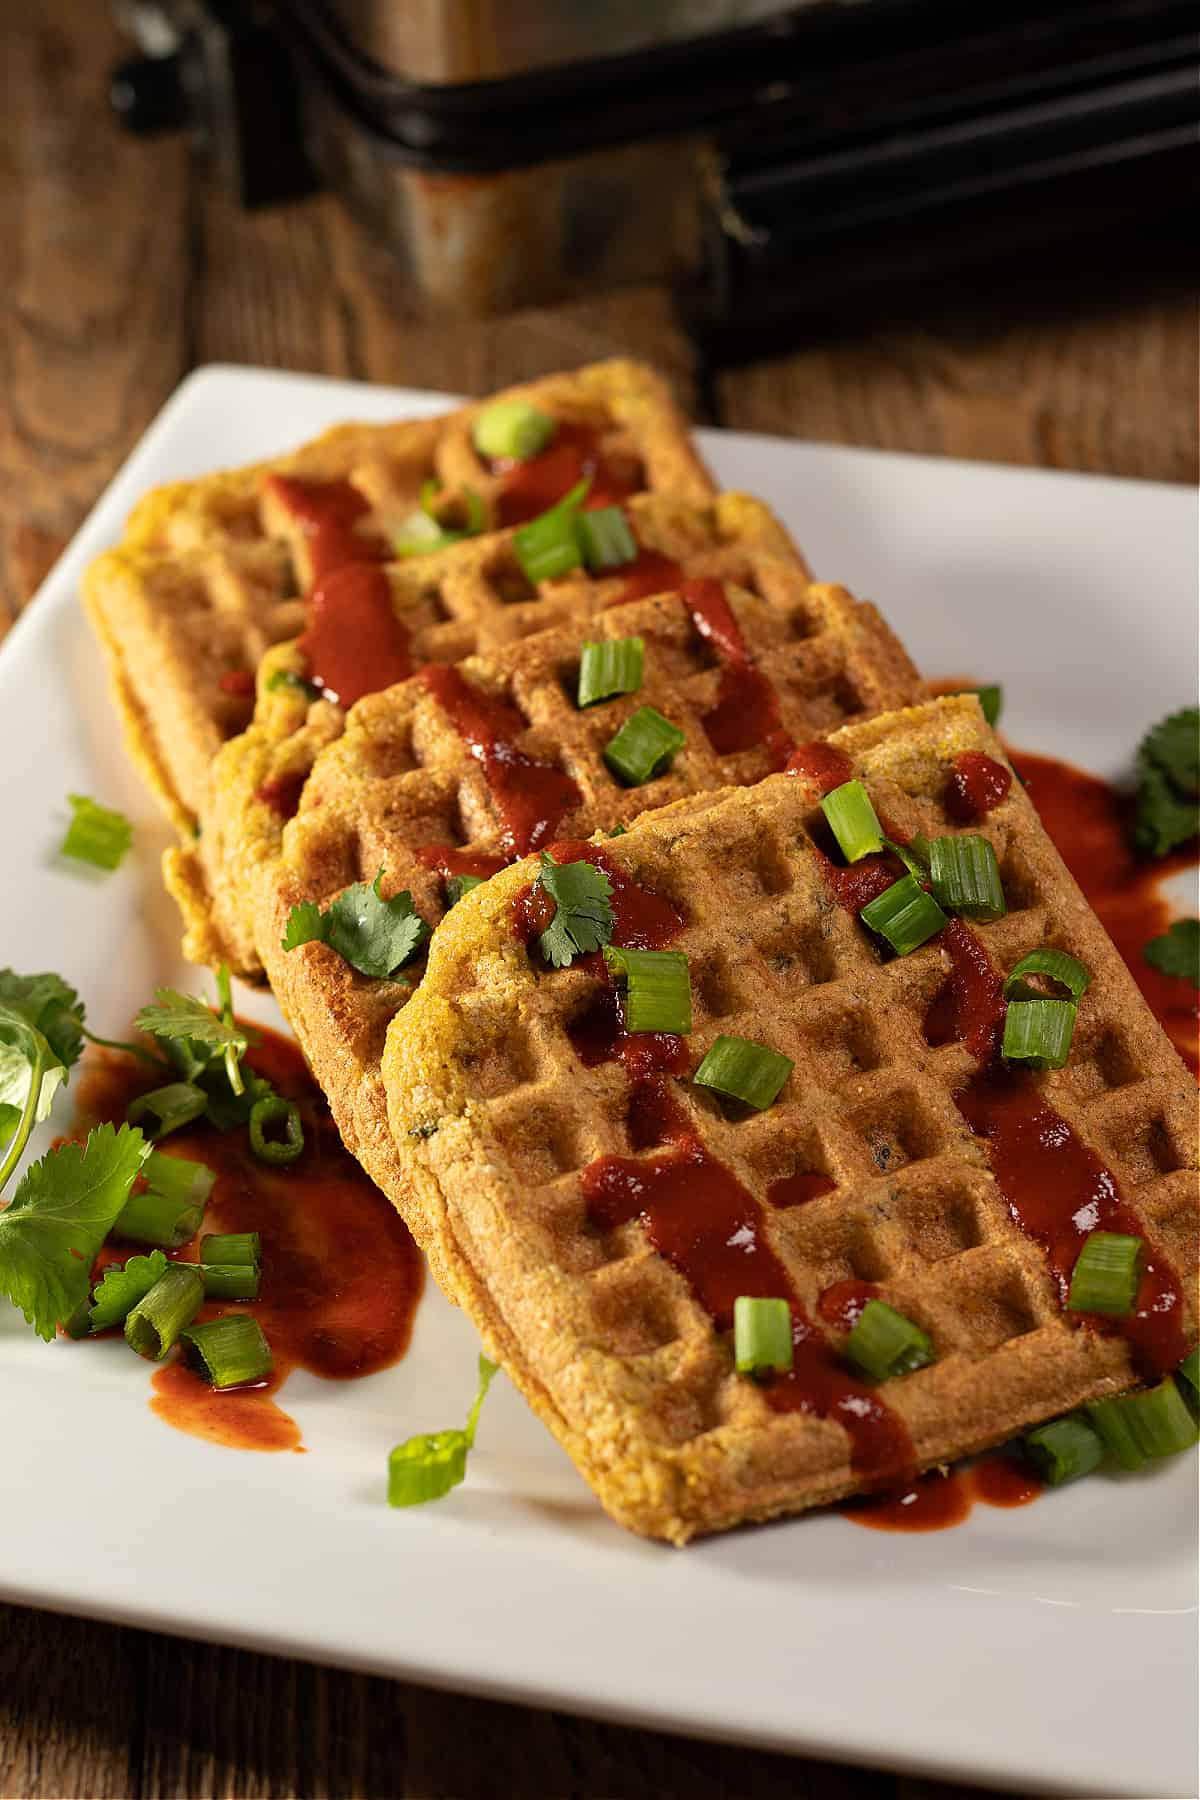 gluten-free cornbread waffles drizzled in red Chile sauce